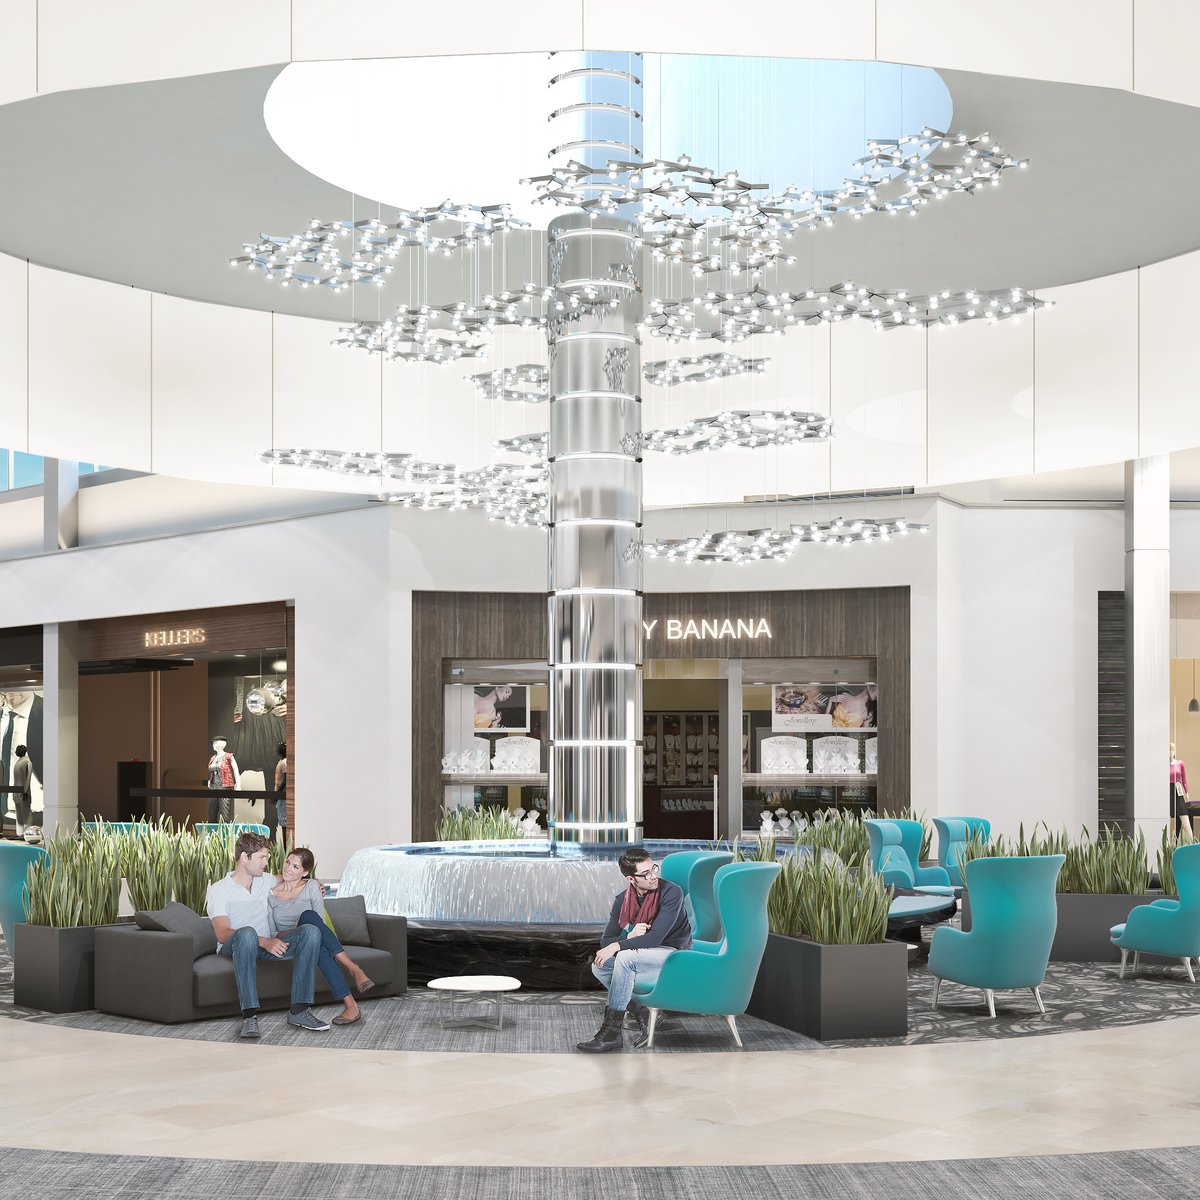 Town Center at Boca Raton adds retailers, renovates spaces - South